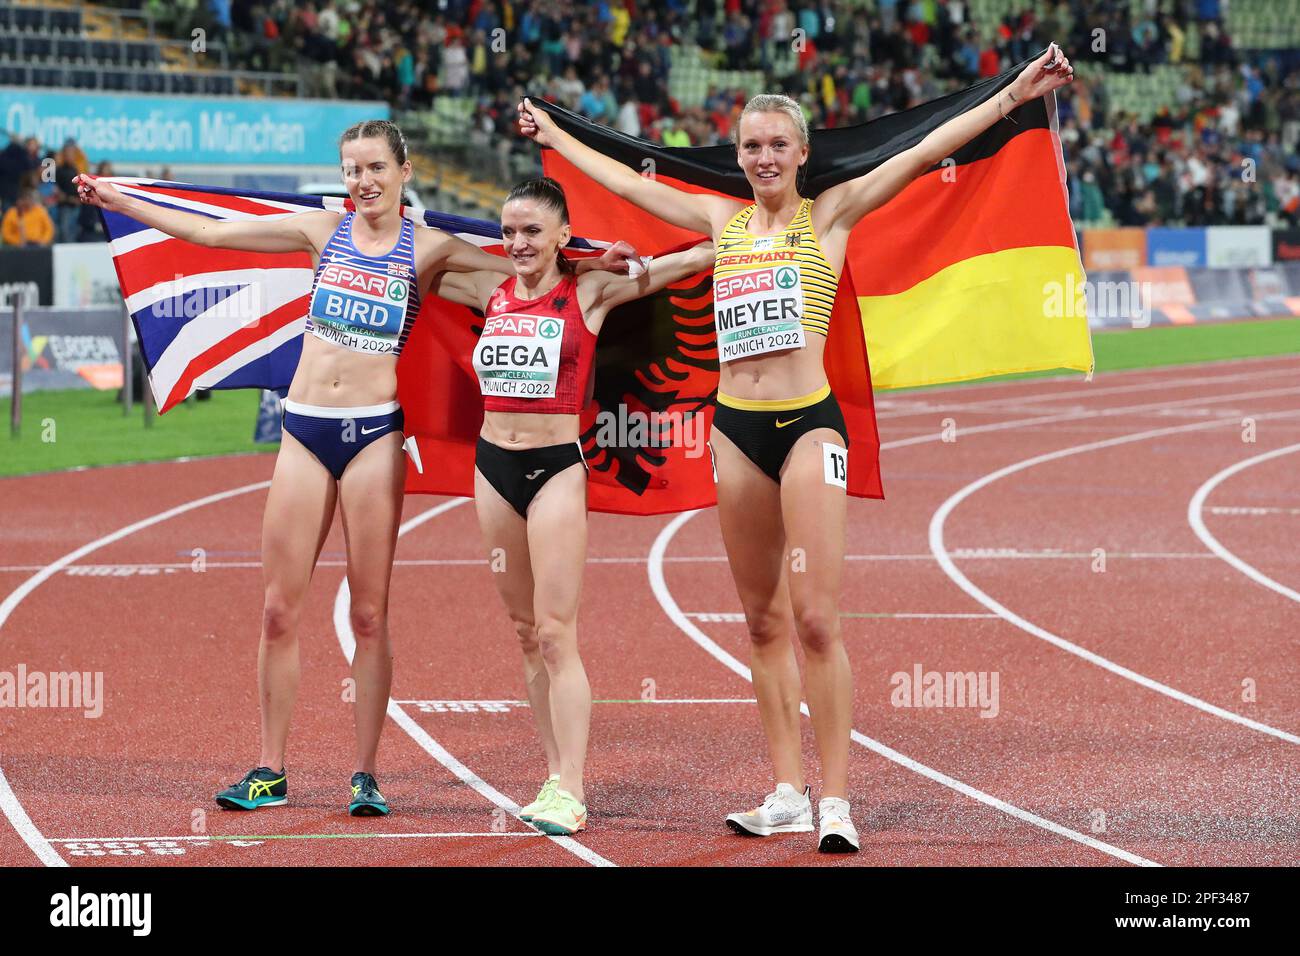 Luiza GEGA, Lea MEYER & Elizabeth BIRD celebrating after winning the Medals in the 3000m Steeplechase at the European Athletics Championship 2022 Stock Photo